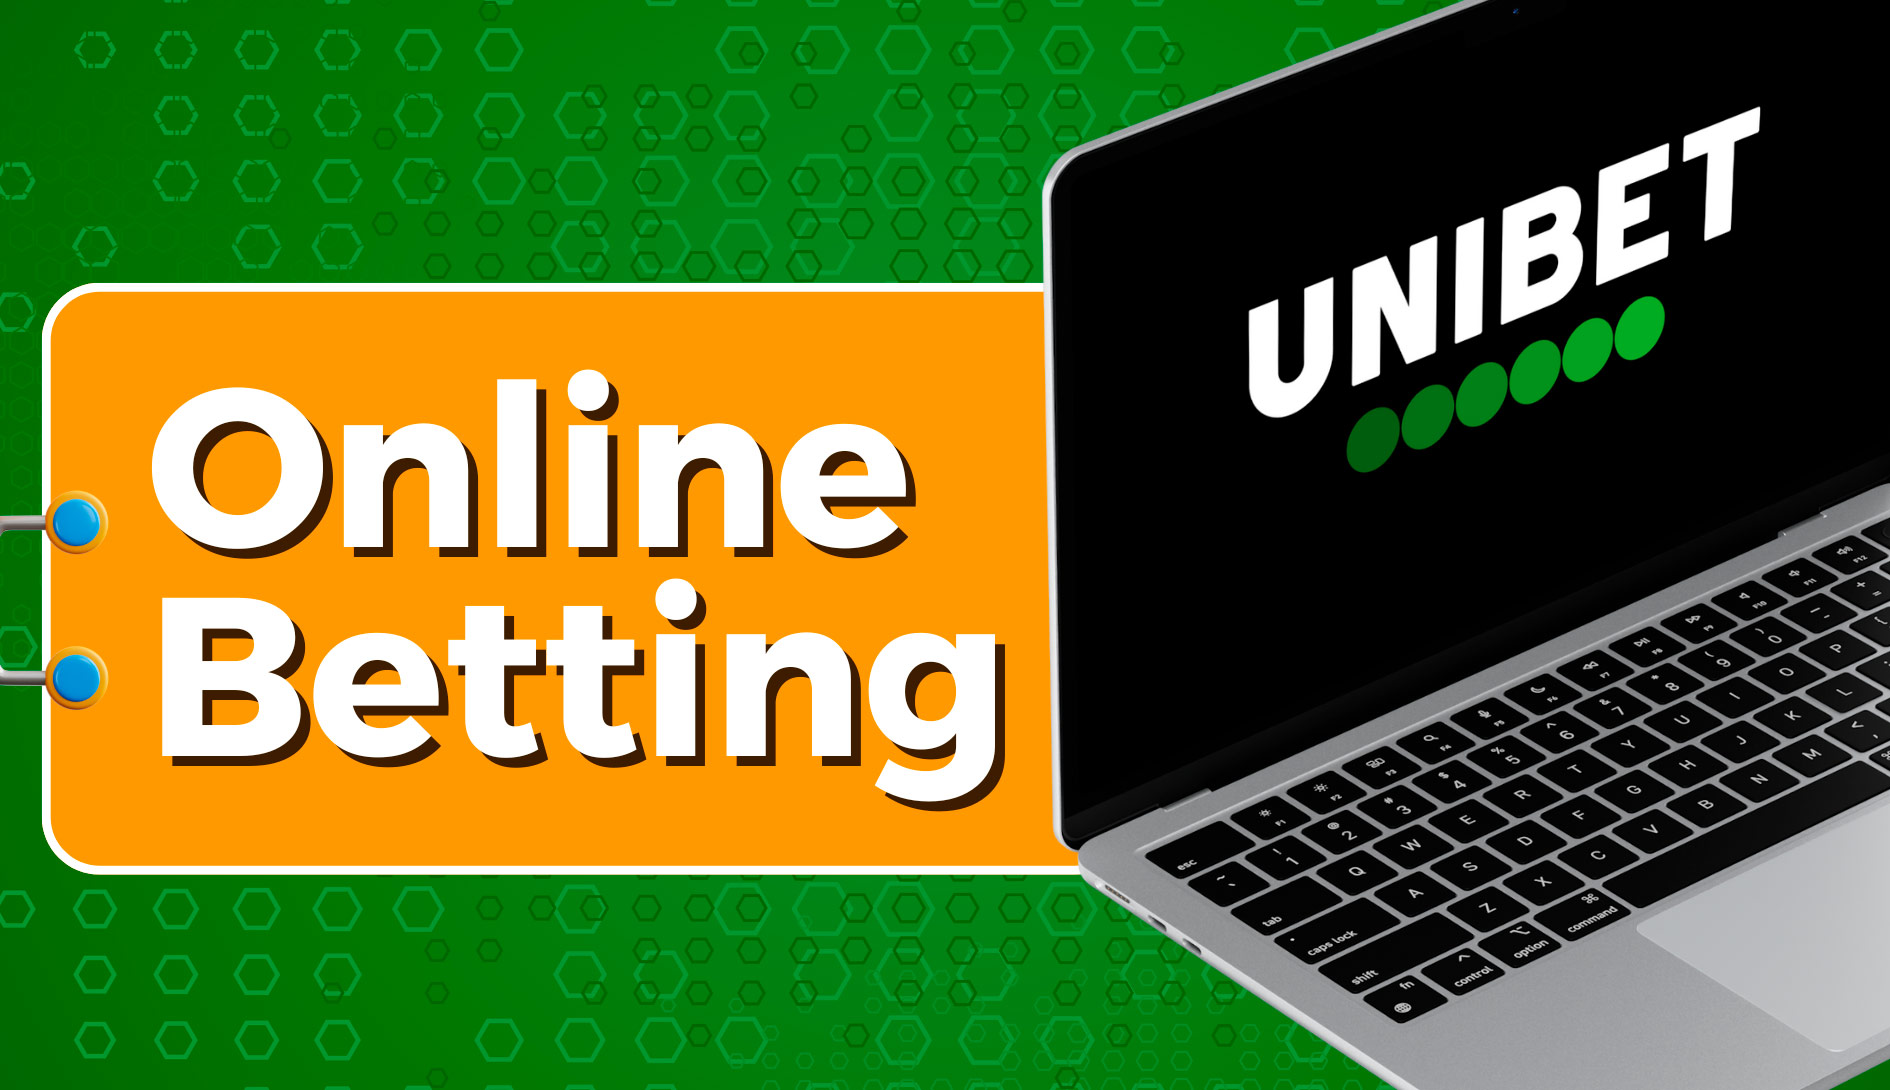 Unibet Online Betting Platform: Know About Its Several Games, Download Process, And More